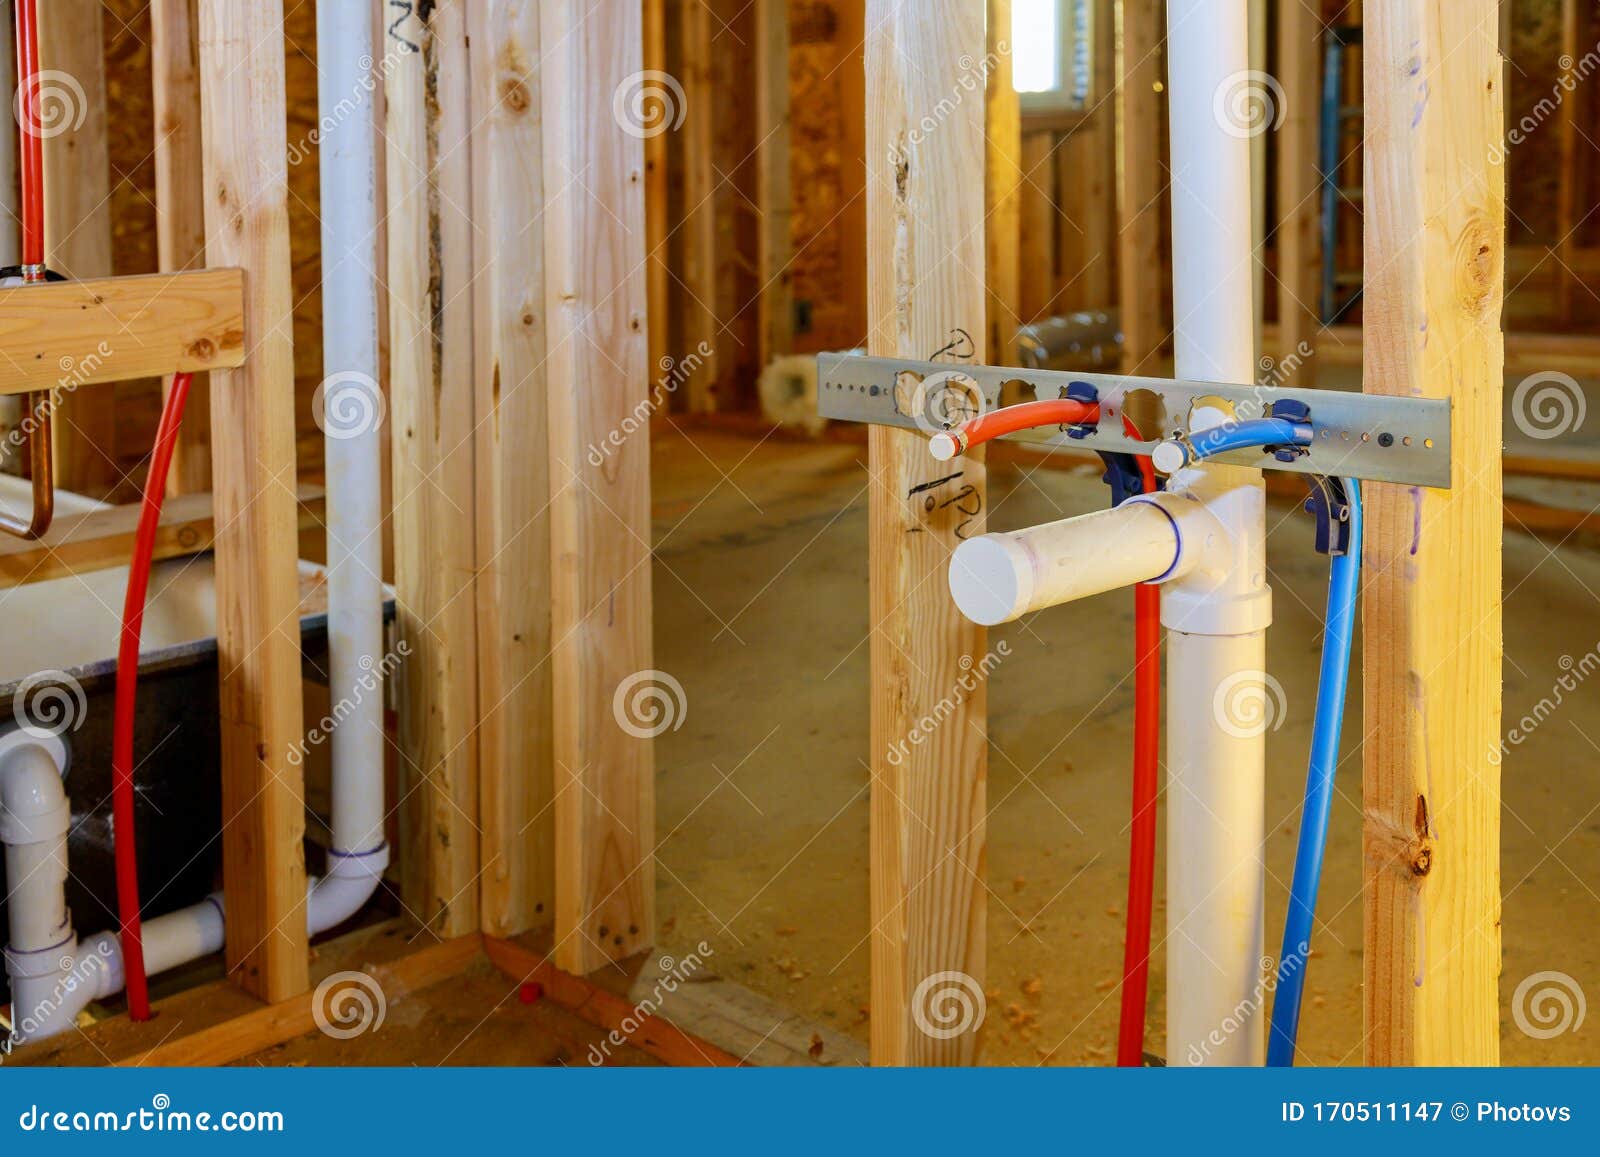 Pvc Pipe Connections Assemble And Install Water Drain Under The Bathroom Sink Stock Image Image Of Drain